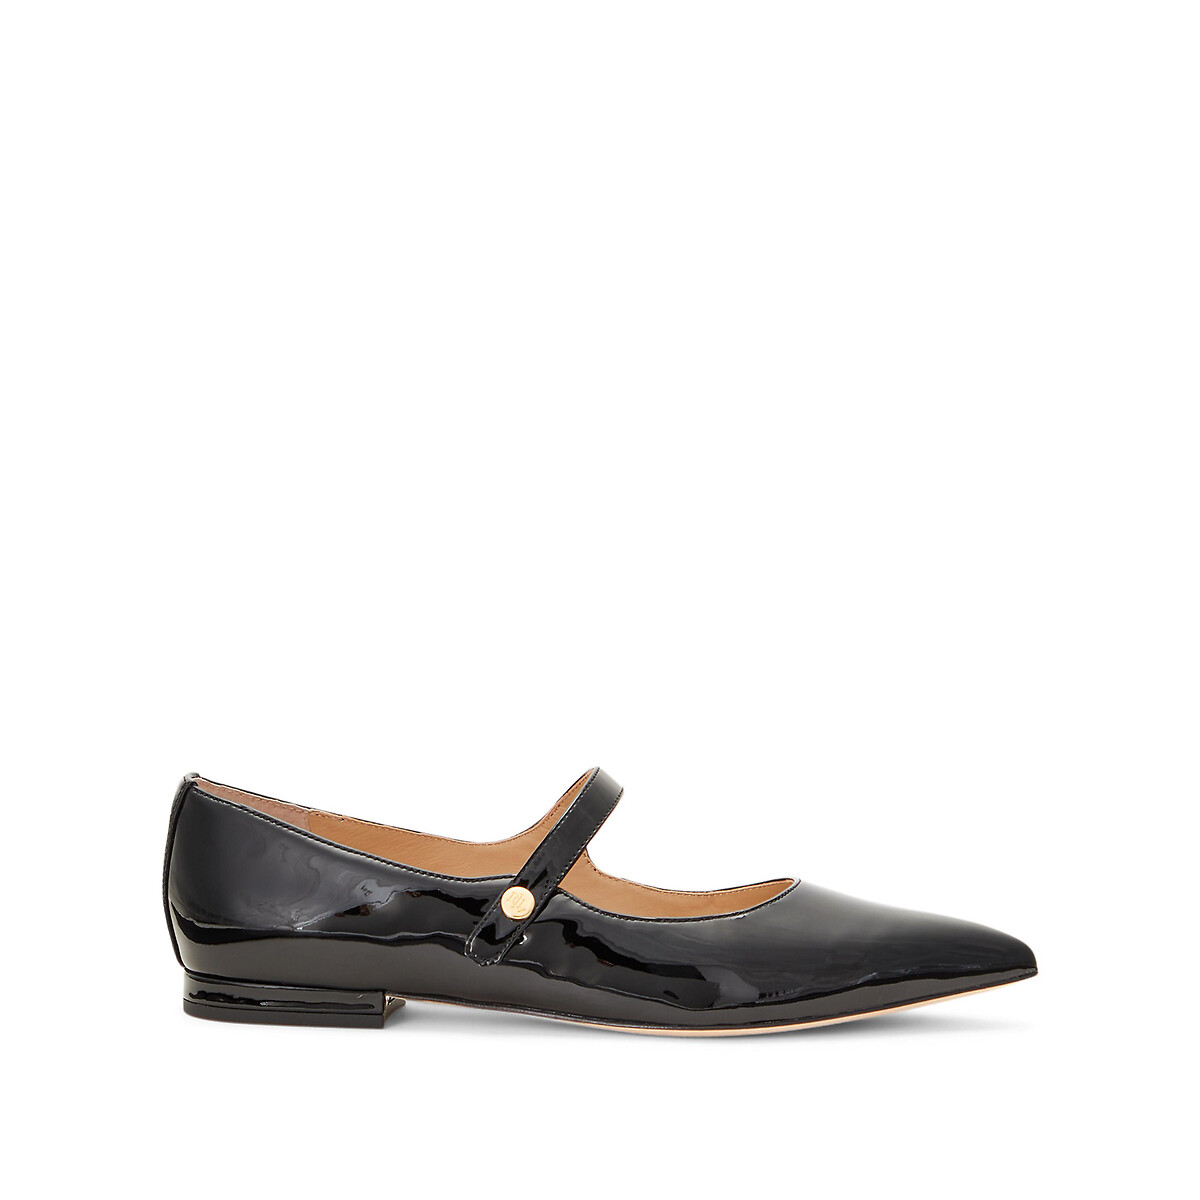 Patent Leather Mary Janes with Flat Heel and Pointed Toe